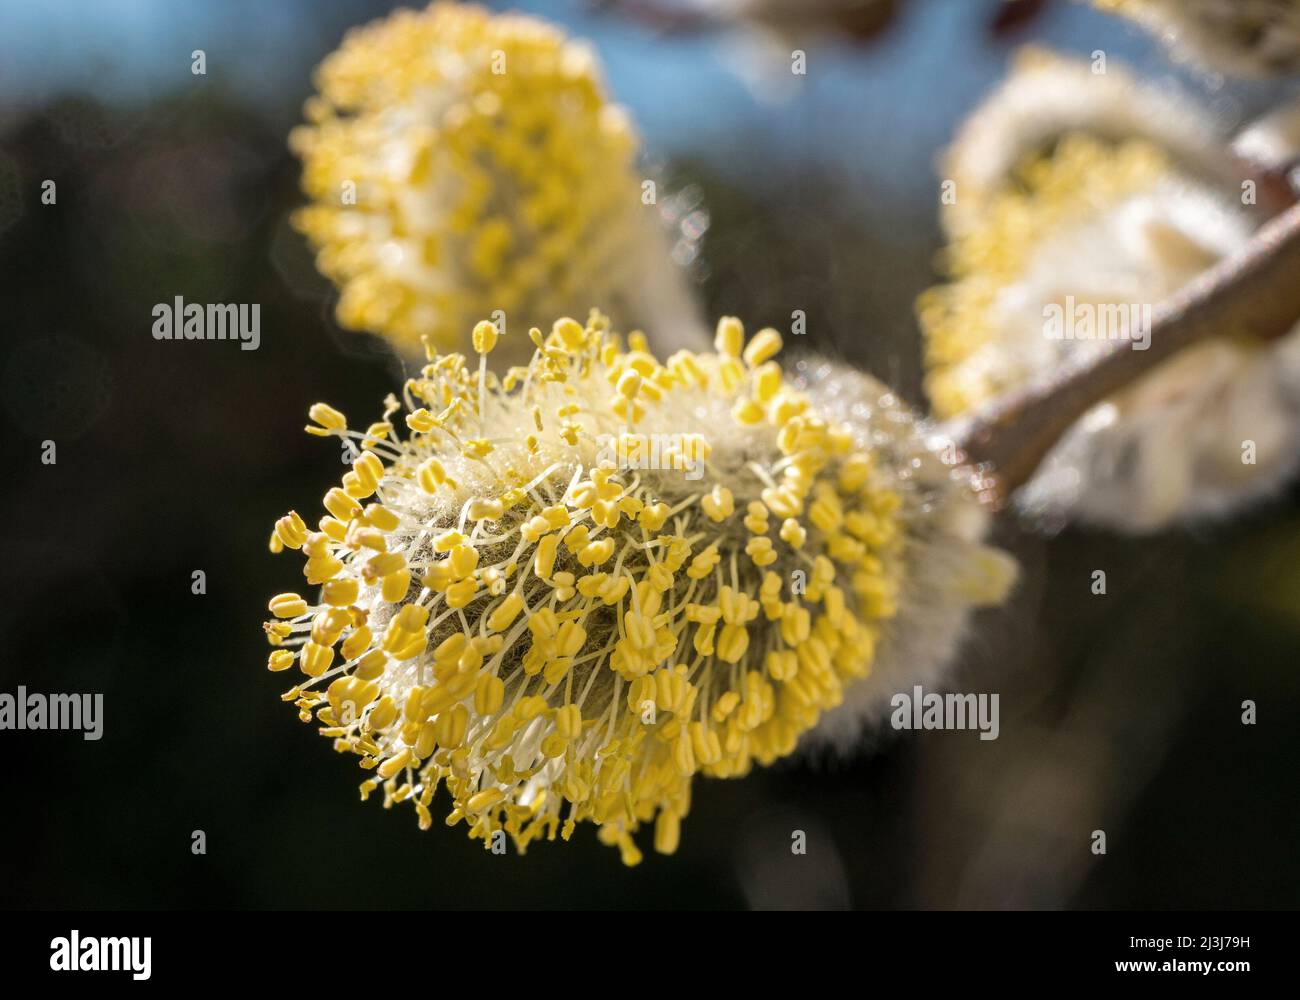 Yellow flowering sal willow (Salix caprea) with male flowers, willow catkins, Bavaria, Germany, Europe Stock Photo